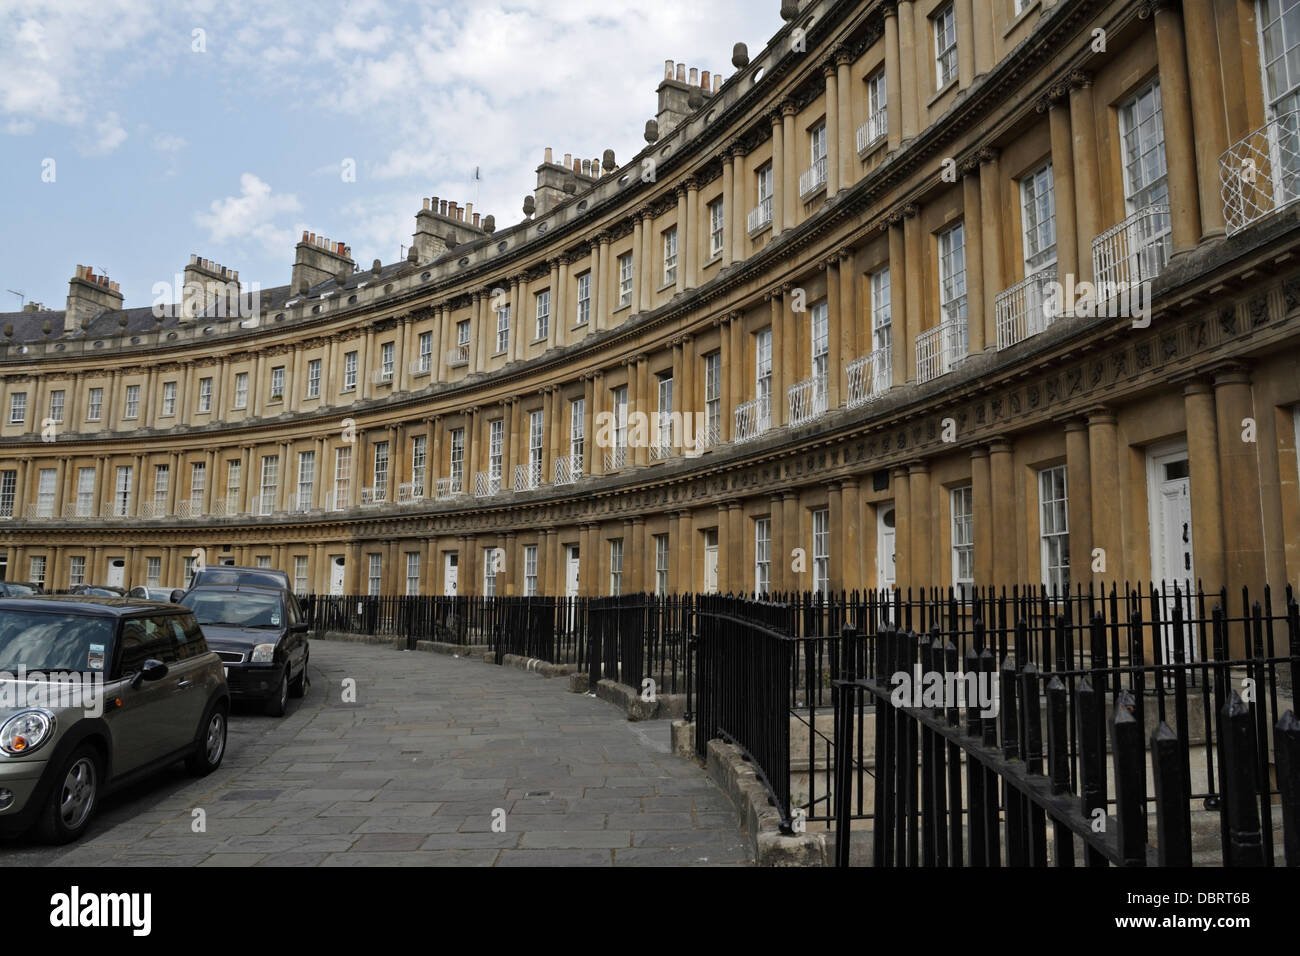 The Circus townhouses in Bath England a georgian crescent of houses. Grade I listed building. English world heritage city Stock Photo